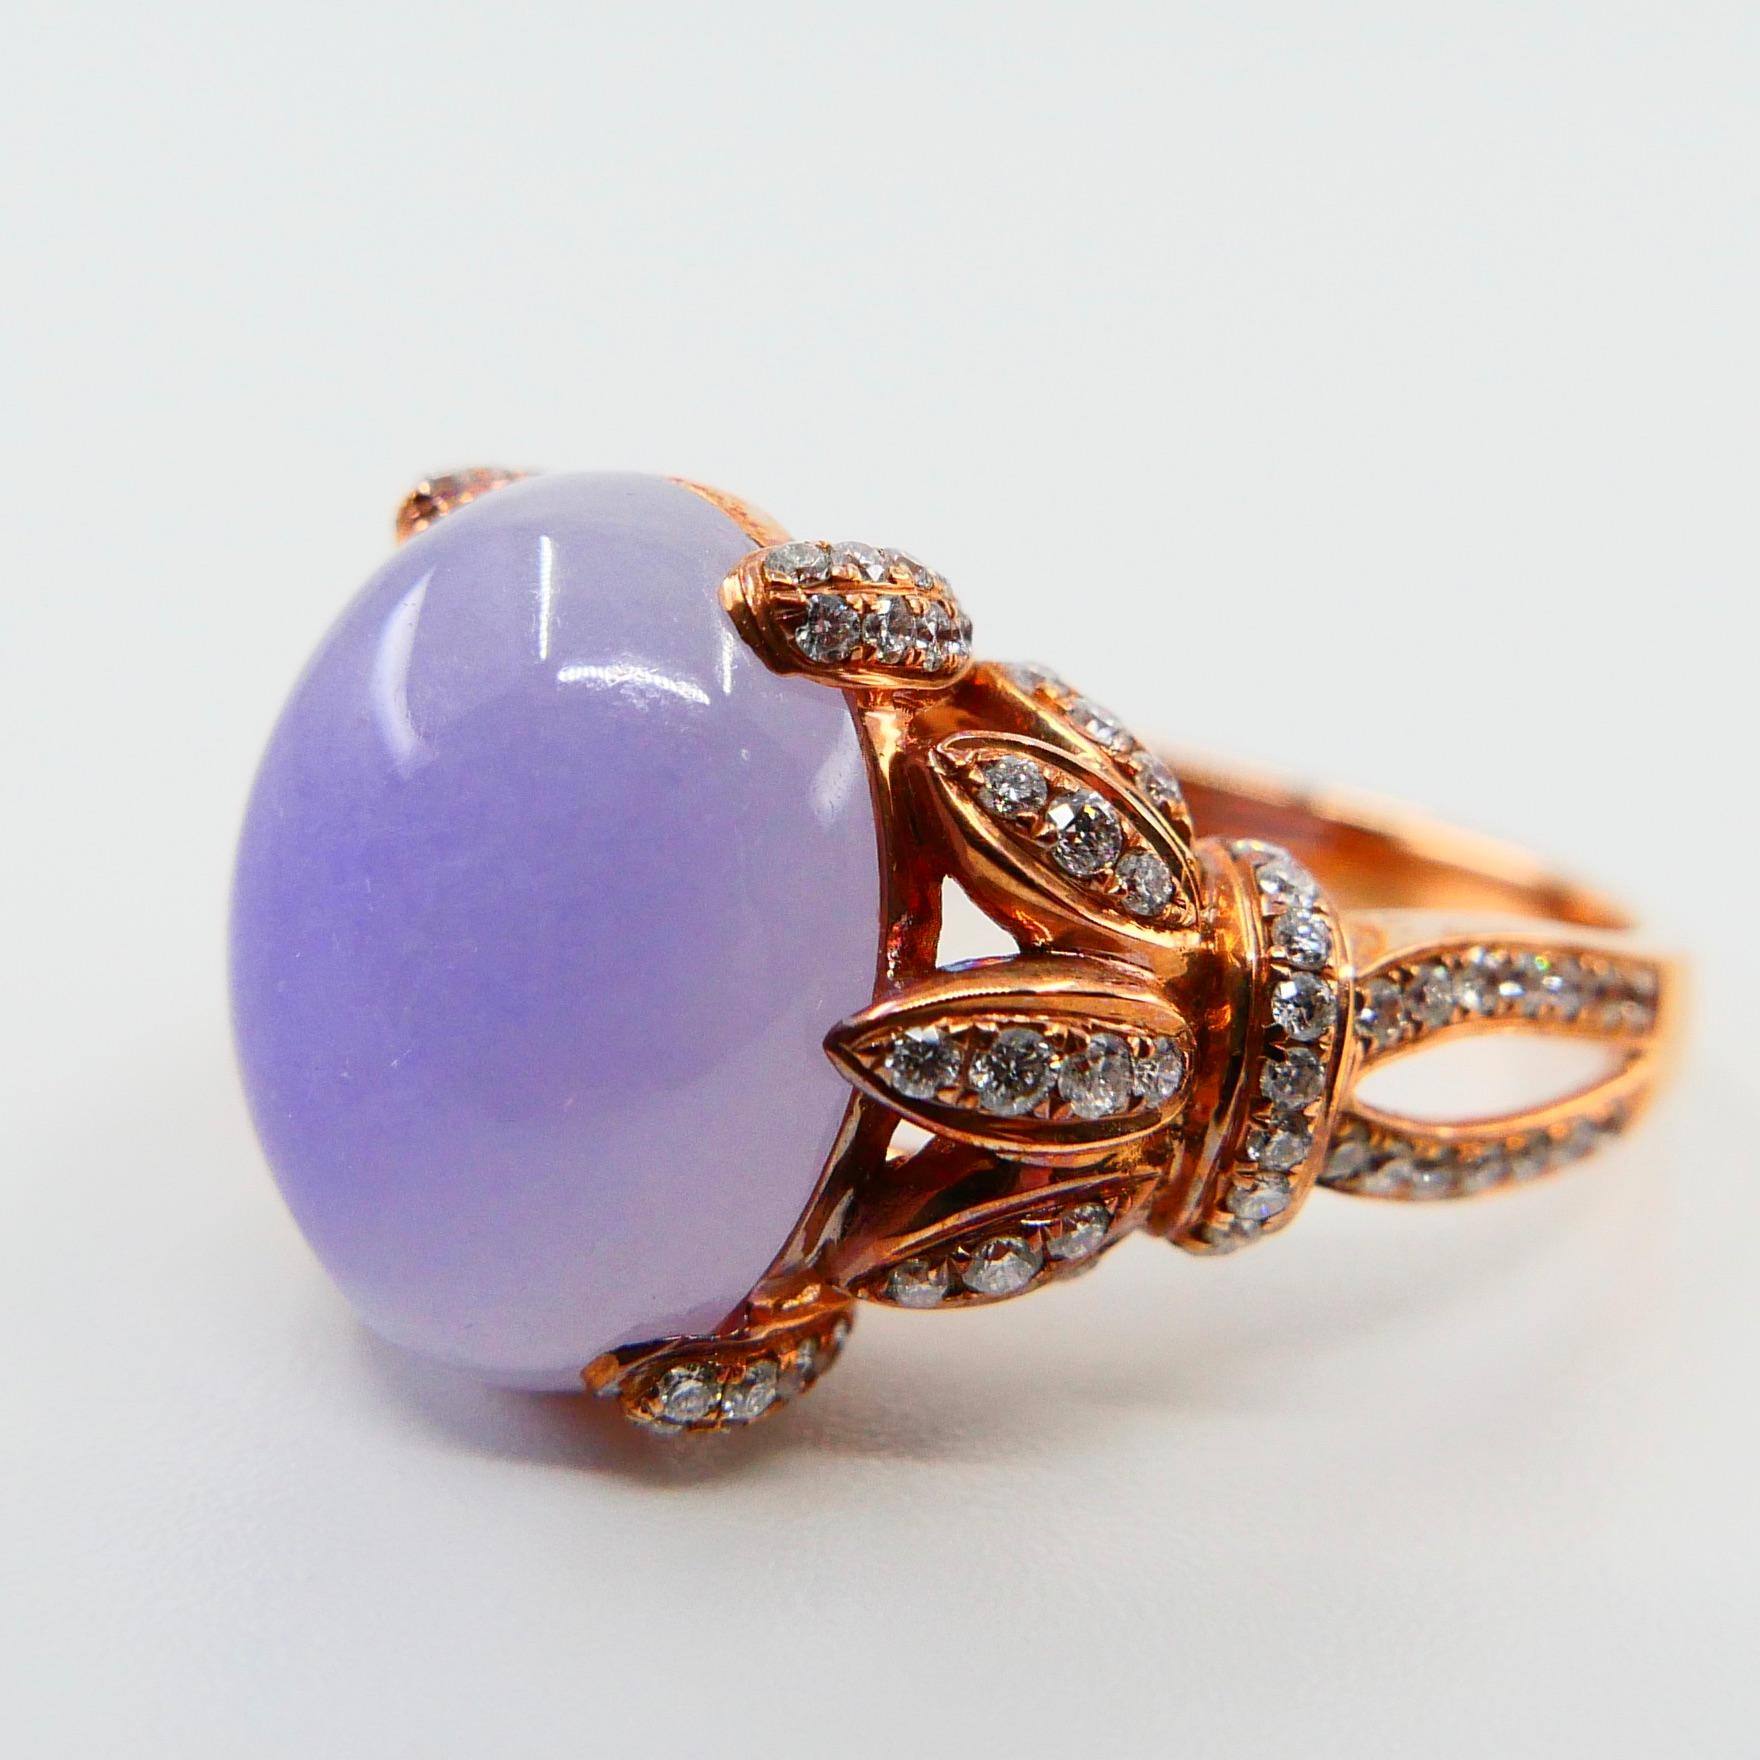 Cabochon Certified Natural Type A Lavender Jadeite Jade Rose Gold Diamond Cocktail Ring For Sale